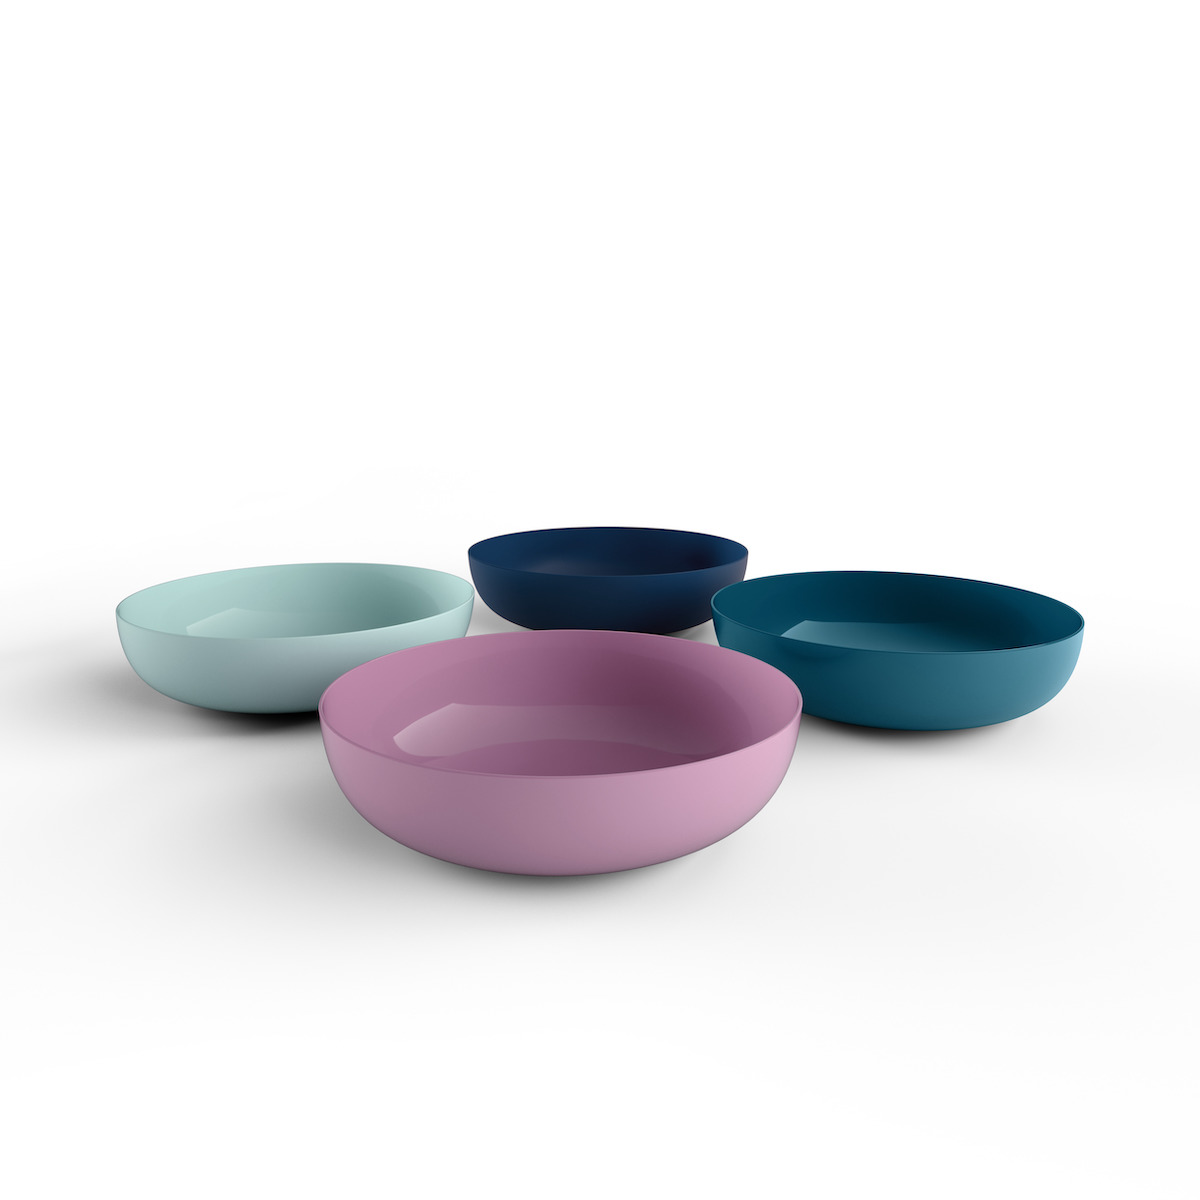 Four coloured basins from Kaldewei